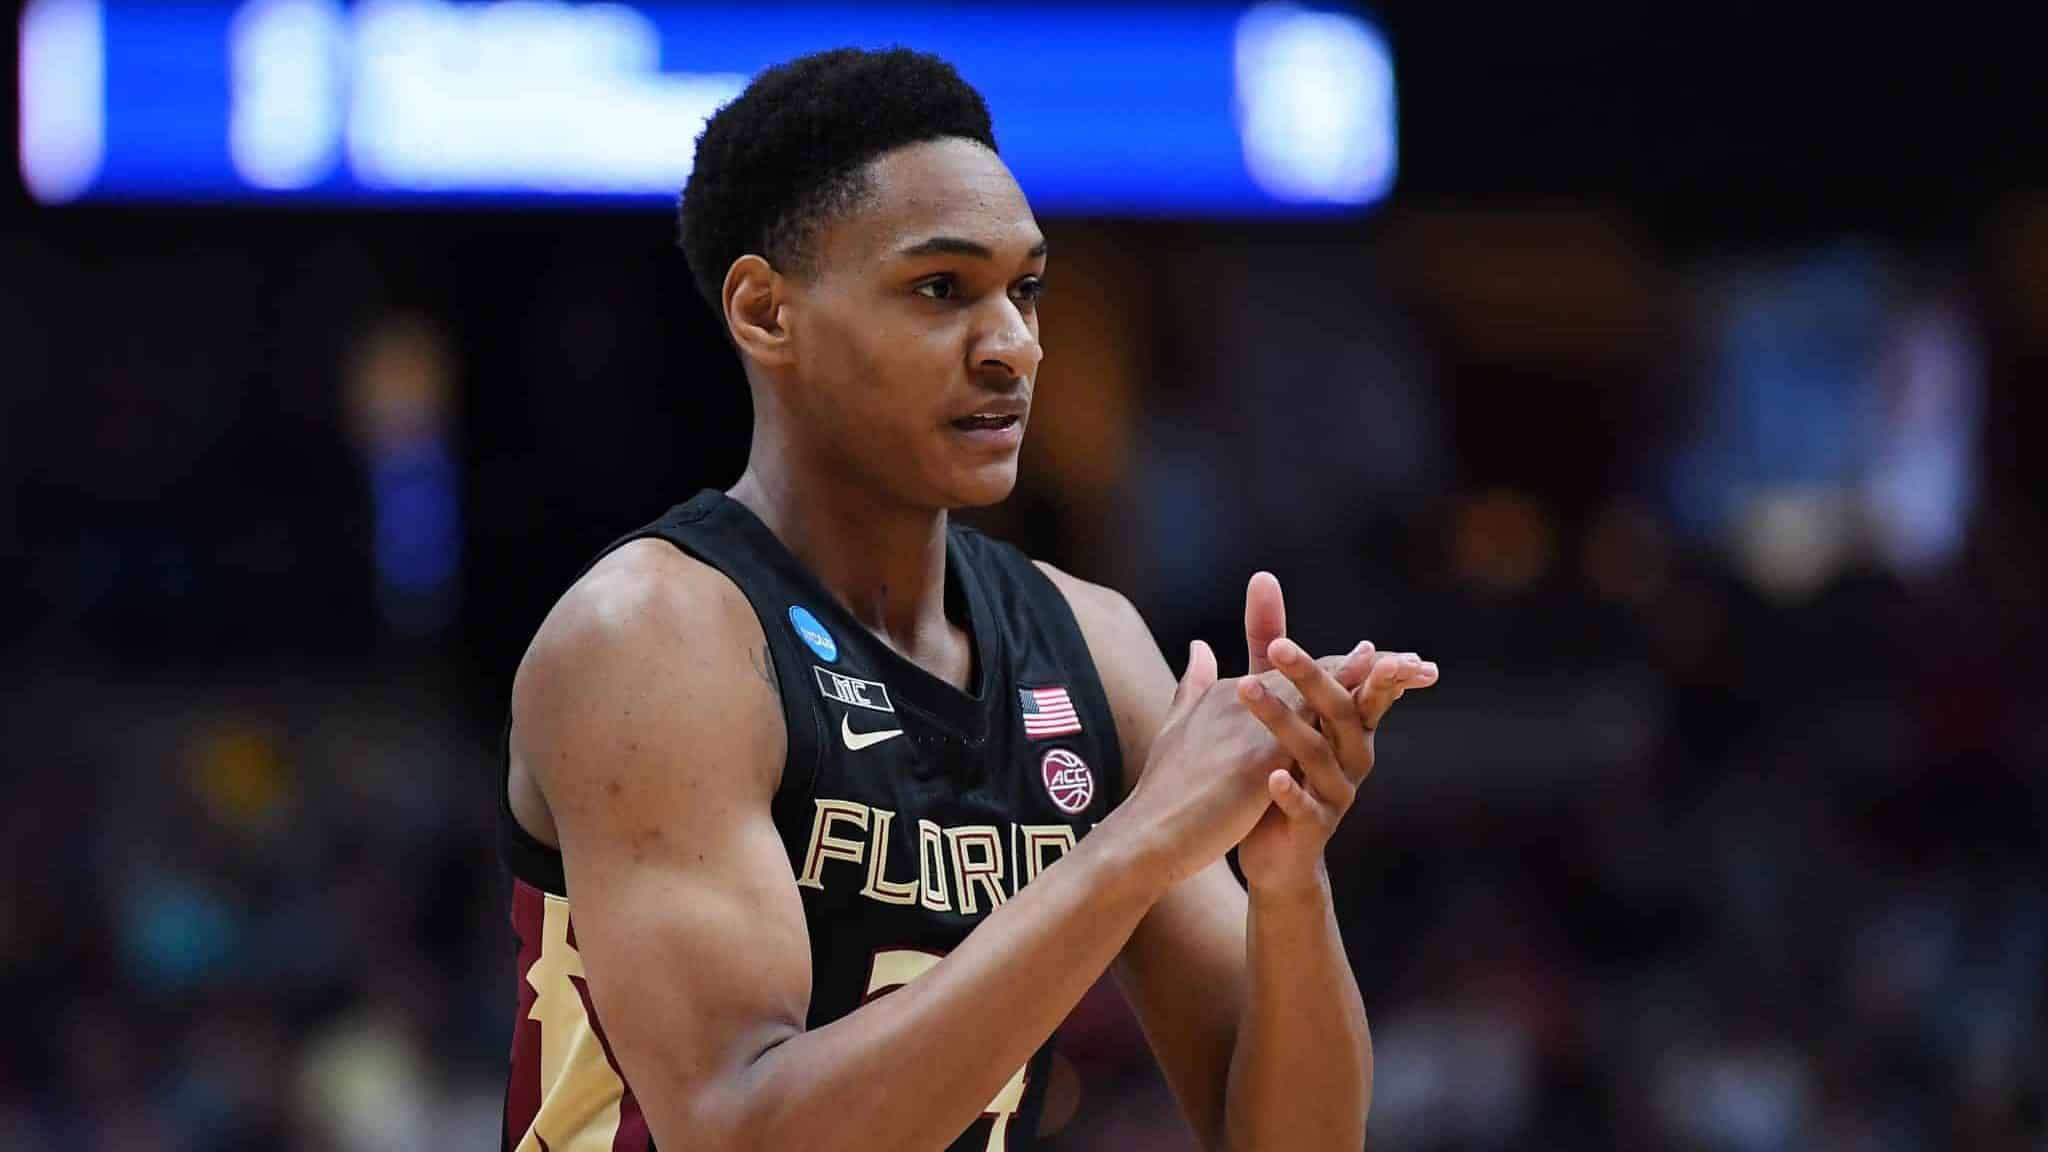 ANAHEIM, CALIFORNIA - MARCH 28: Devin Vassell #24 of the Florida State Seminoles cheers after a play against the Gonzaga Bulldogs during the 2019 NCAA Men's Basketball Tournament West Regional at Honda Center on March 28, 2019 in Anaheim, California.